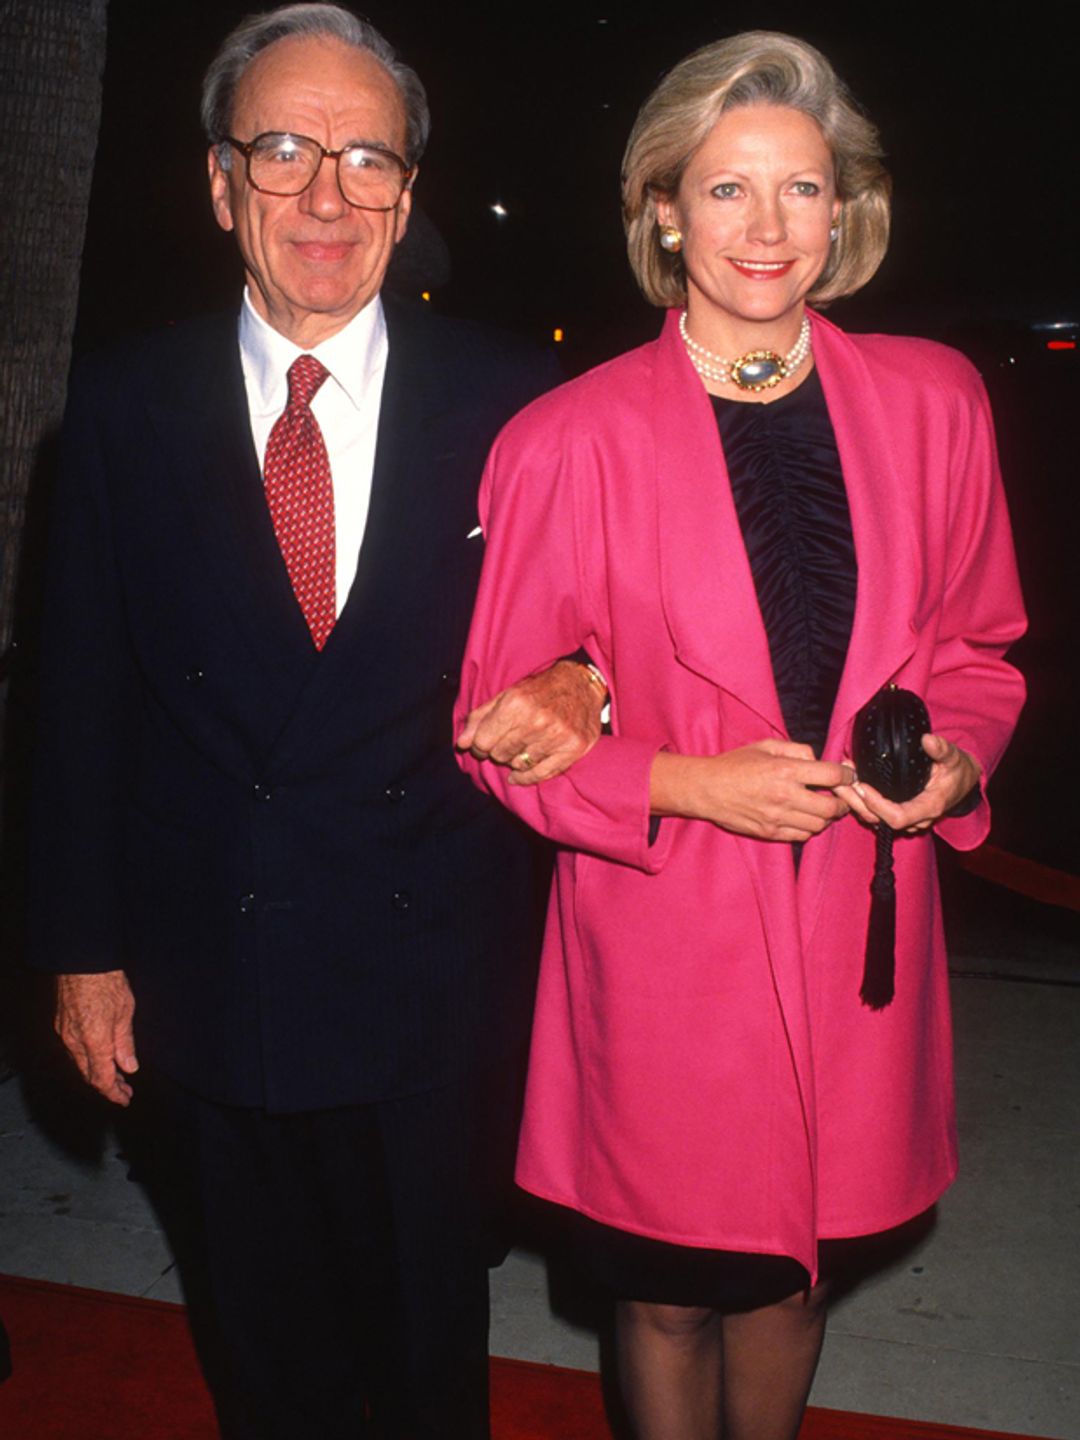 Rupert Murdoch in a suit linking arms with his ex wife Anna in a pink jacket